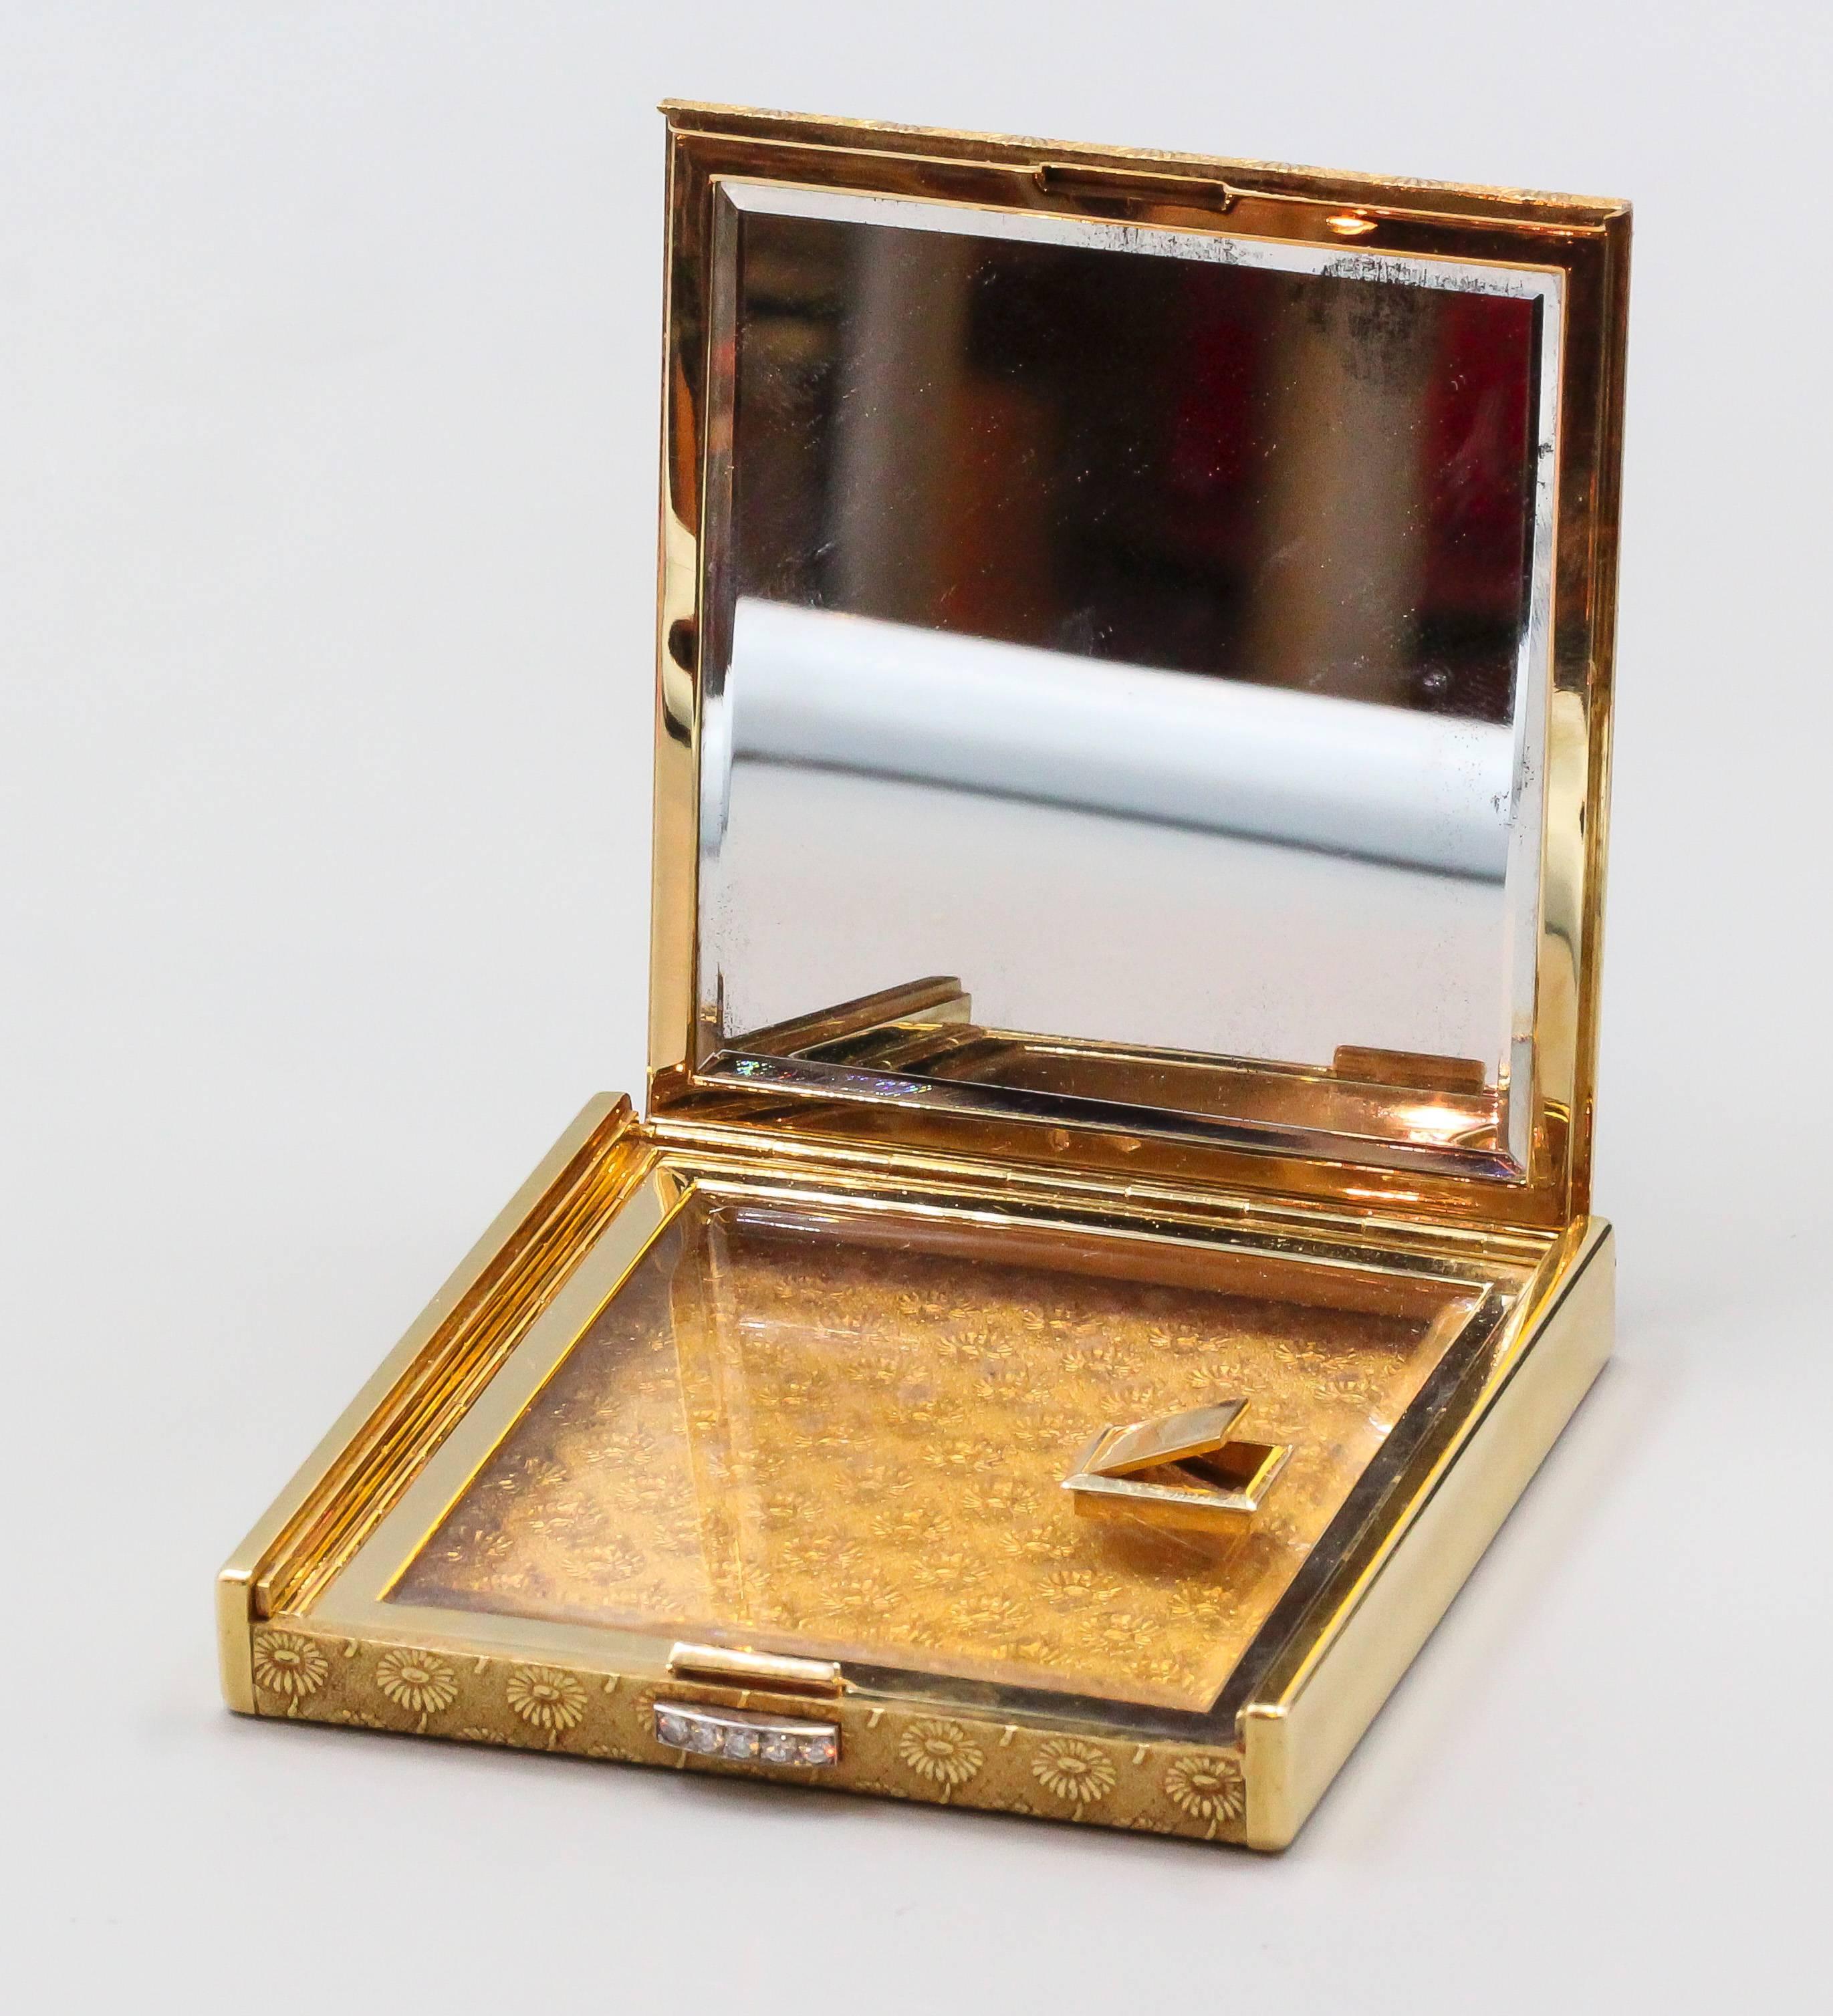 Stunning diamond and 18K yellow gold textured compact case by Boucheron, circa 1960s. It features an expertly made textured flower motif throughout each side. Diamonds are high grade round brilliant cut diamonds, bezel set throughout the top.